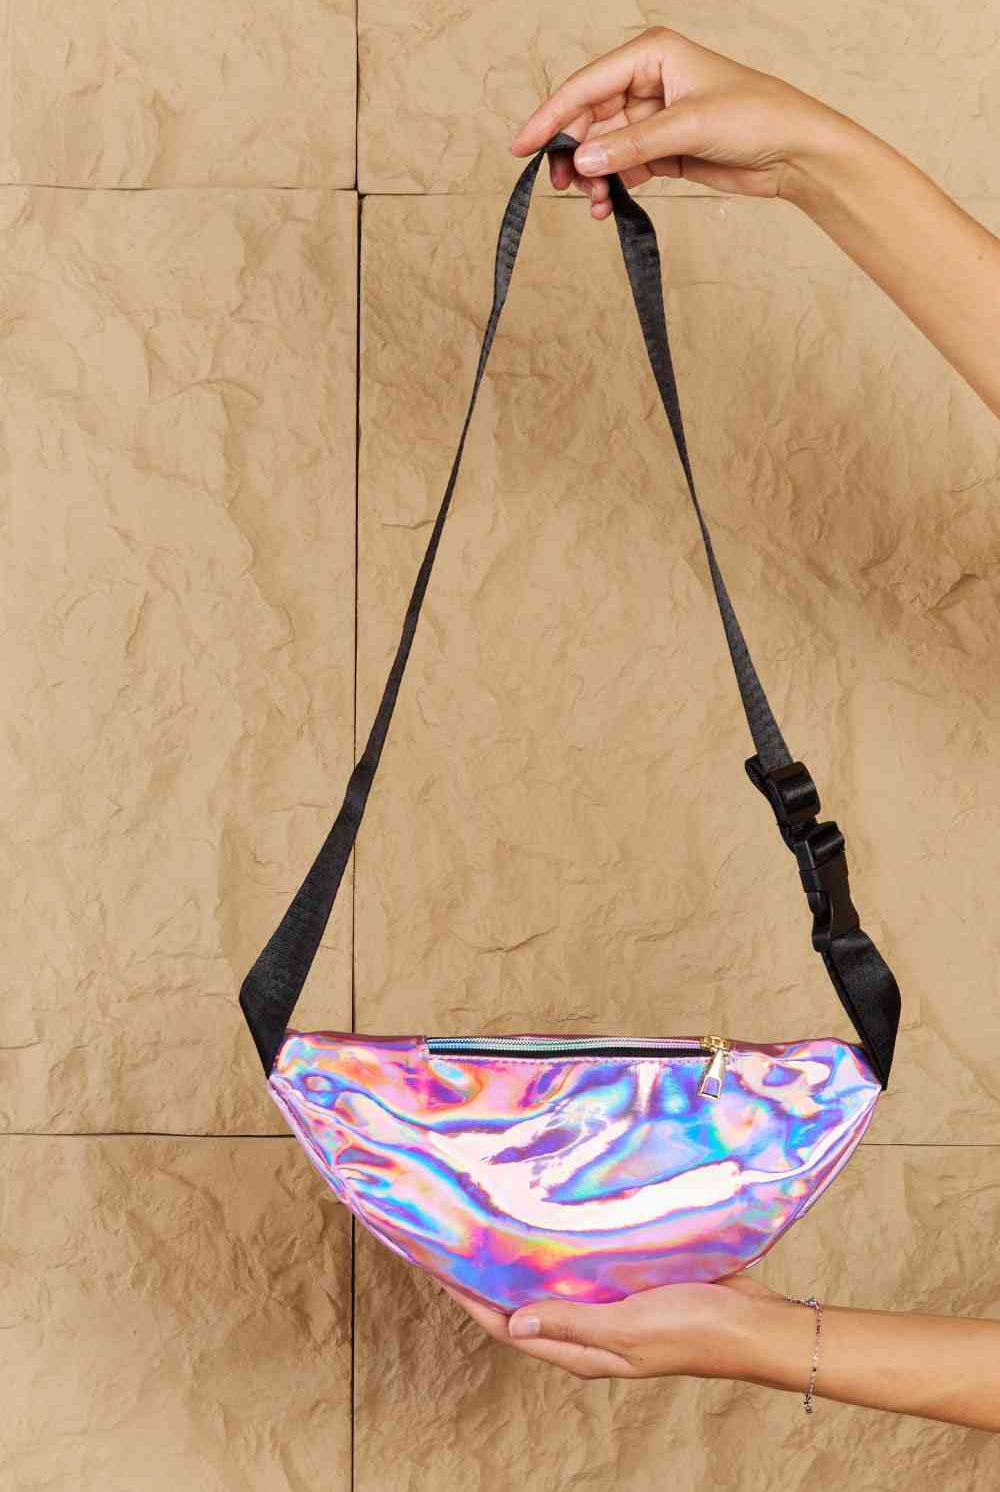 Tan Fame Good Vibrations Holographic Double Zipper Fanny Pack in Hot Pink Clothing